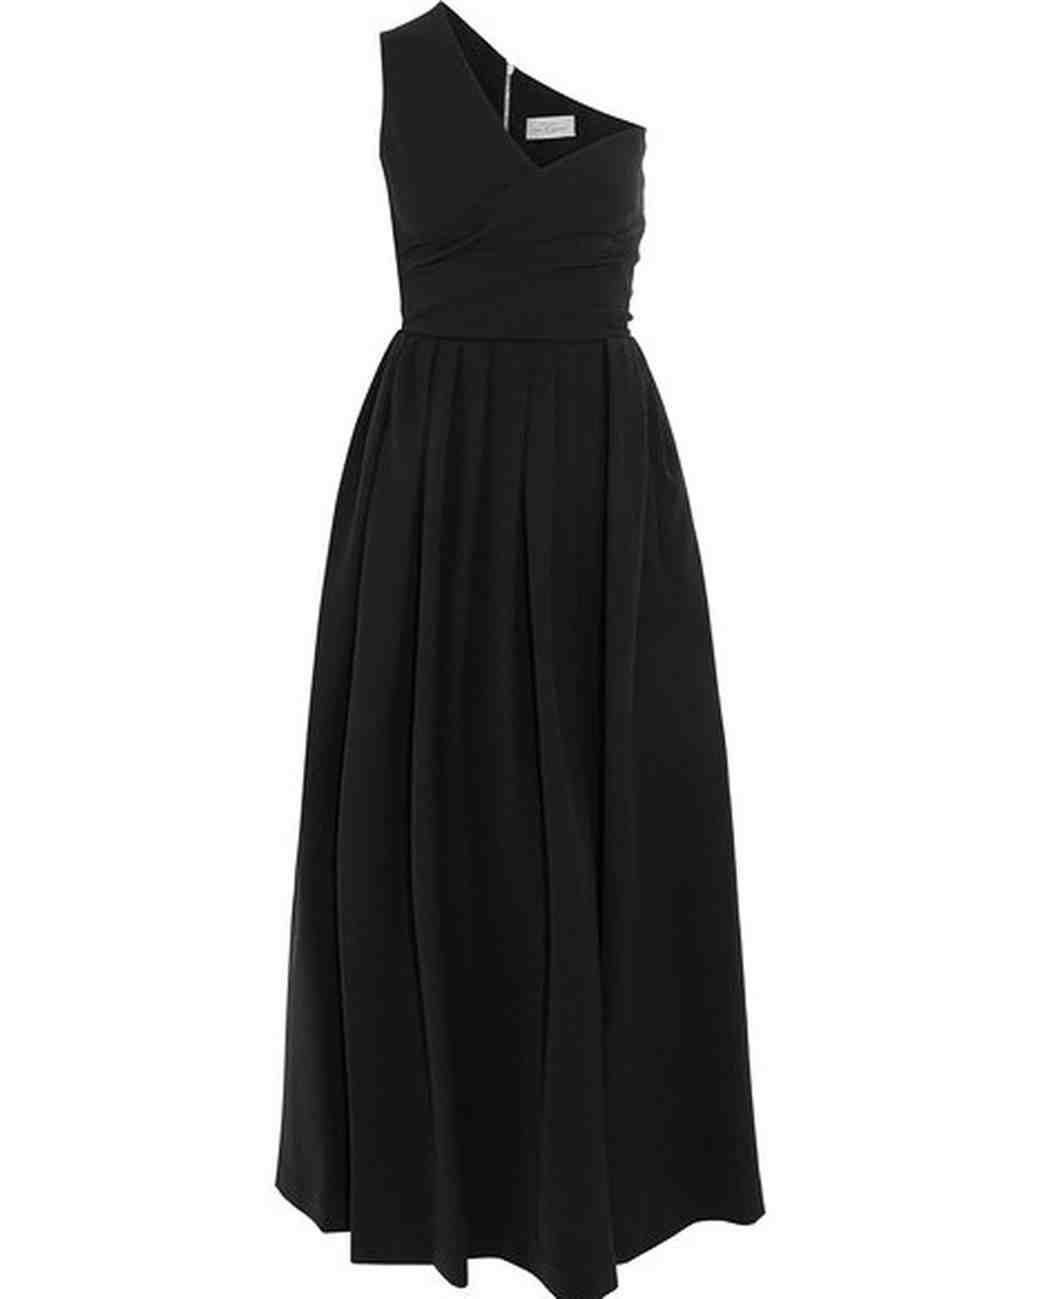 36 Beautiful Dresses to Wear as a Wedding Guest This Fall | Martha ...